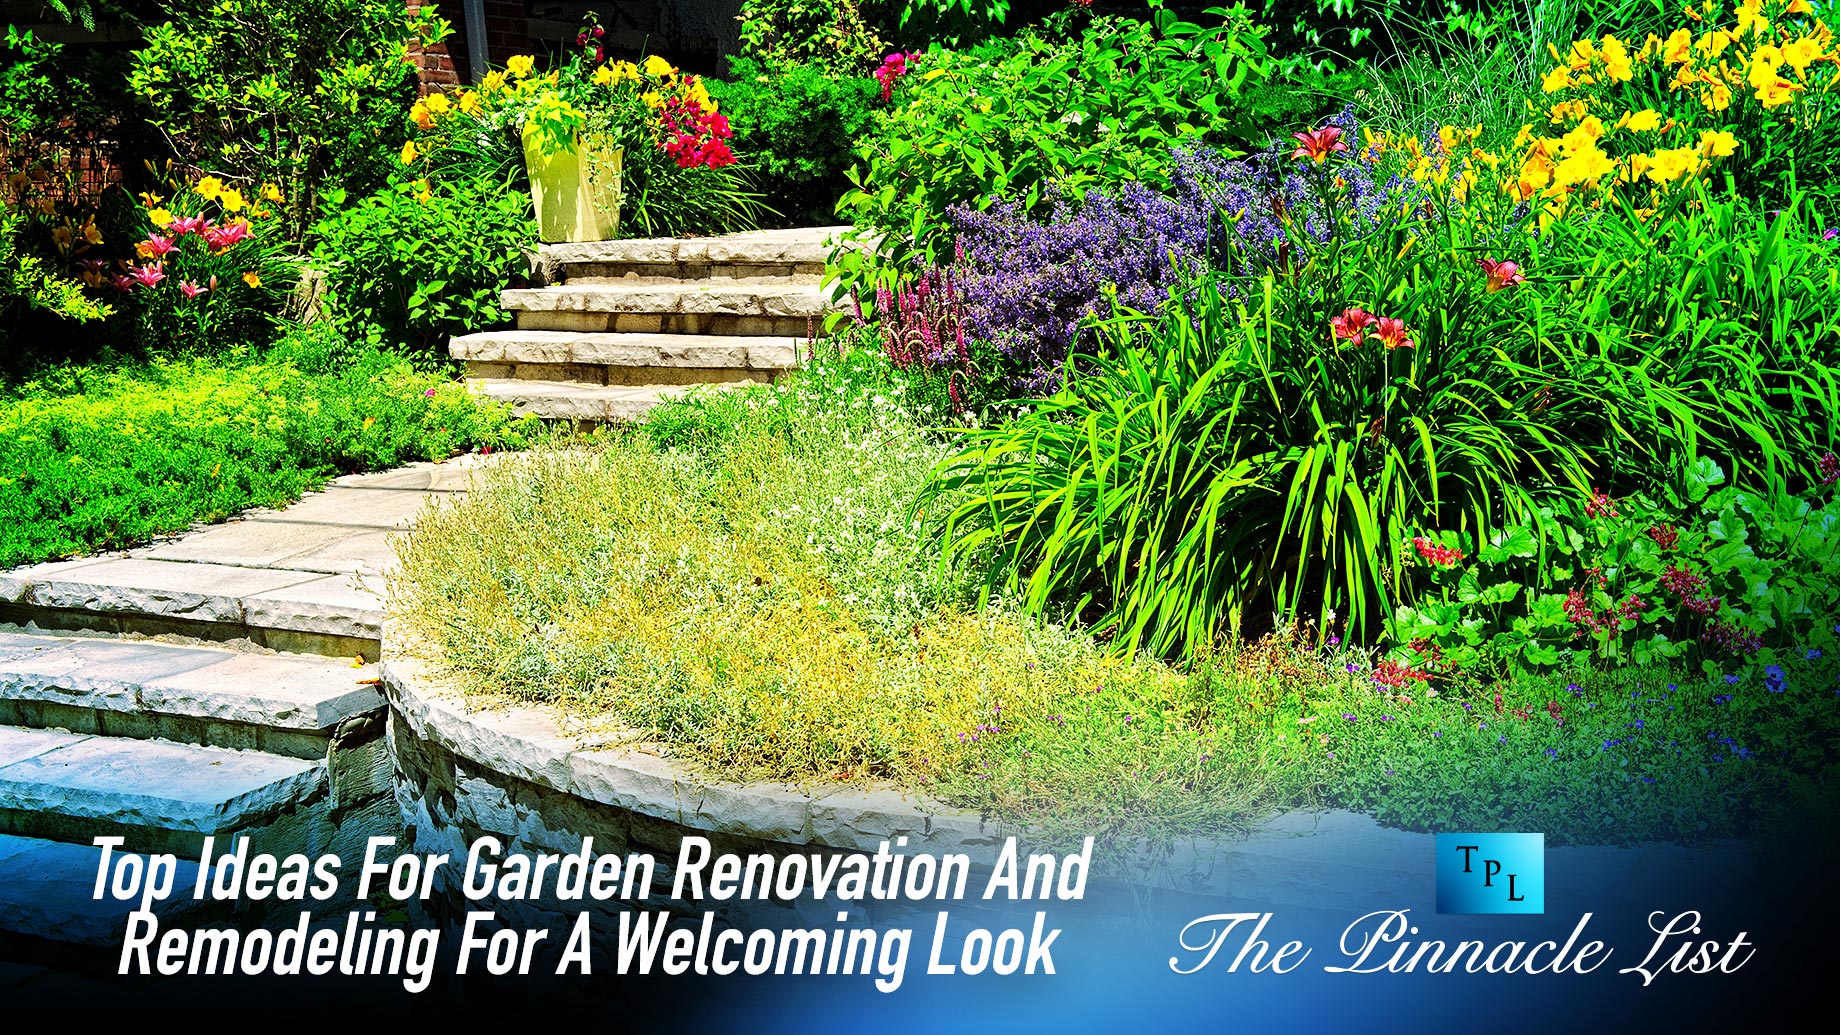 Top Ideas For Garden Renovation And Remodeling For A Welcoming Look